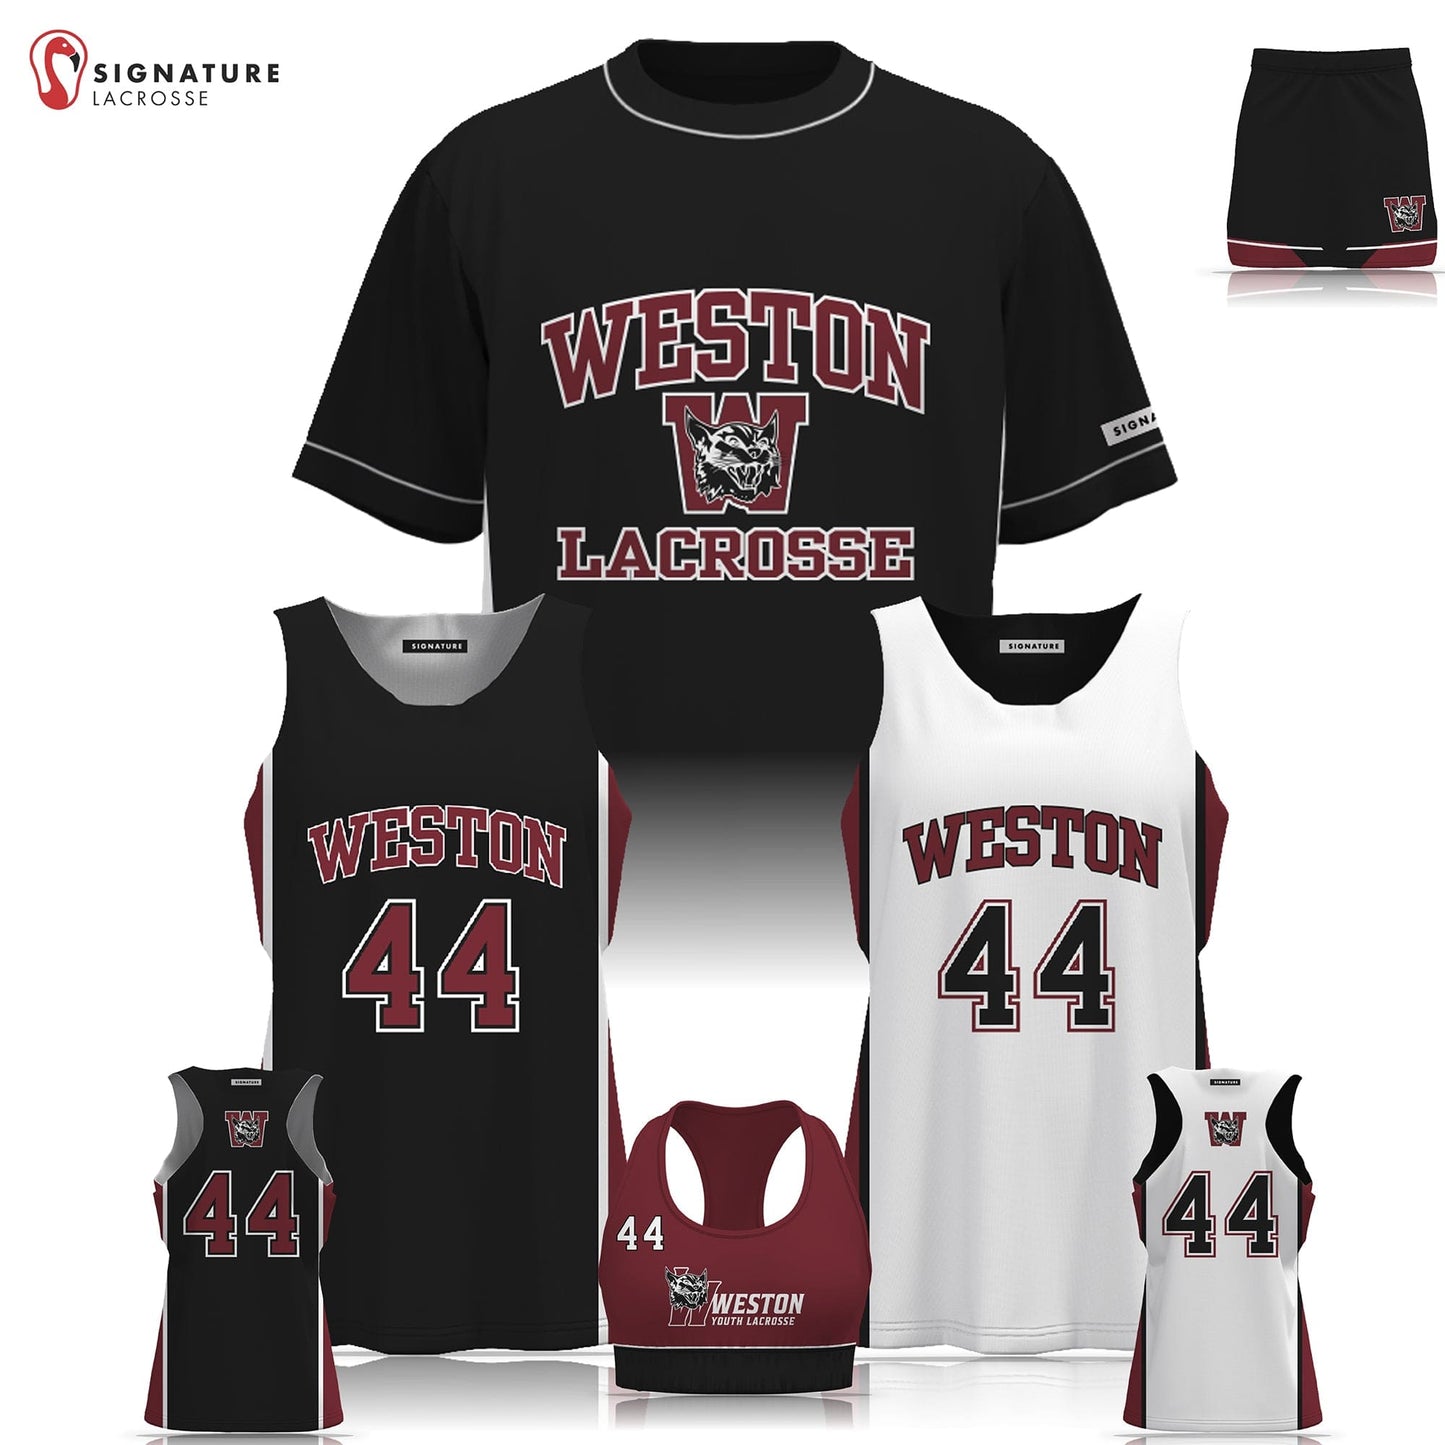 Weston Youth Lacrosse Women's 3 Piece Player Game Package: Grade 5-6 Signature Lacrosse